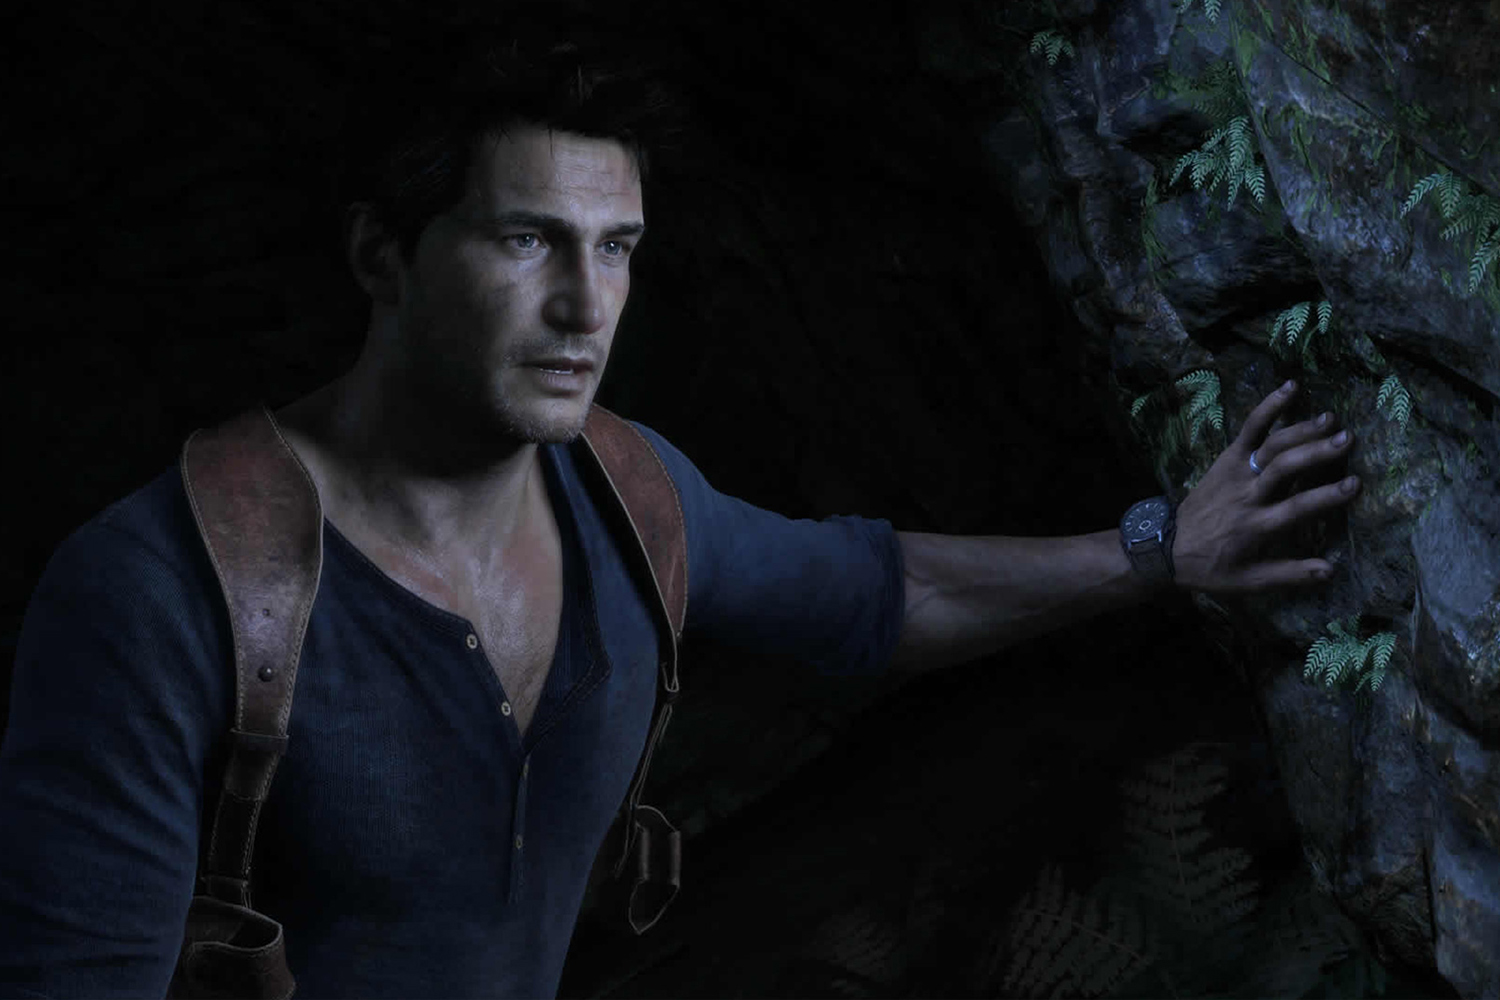 Is UNCHARTED 4: A Thief's End playable on any cloud gaming services?